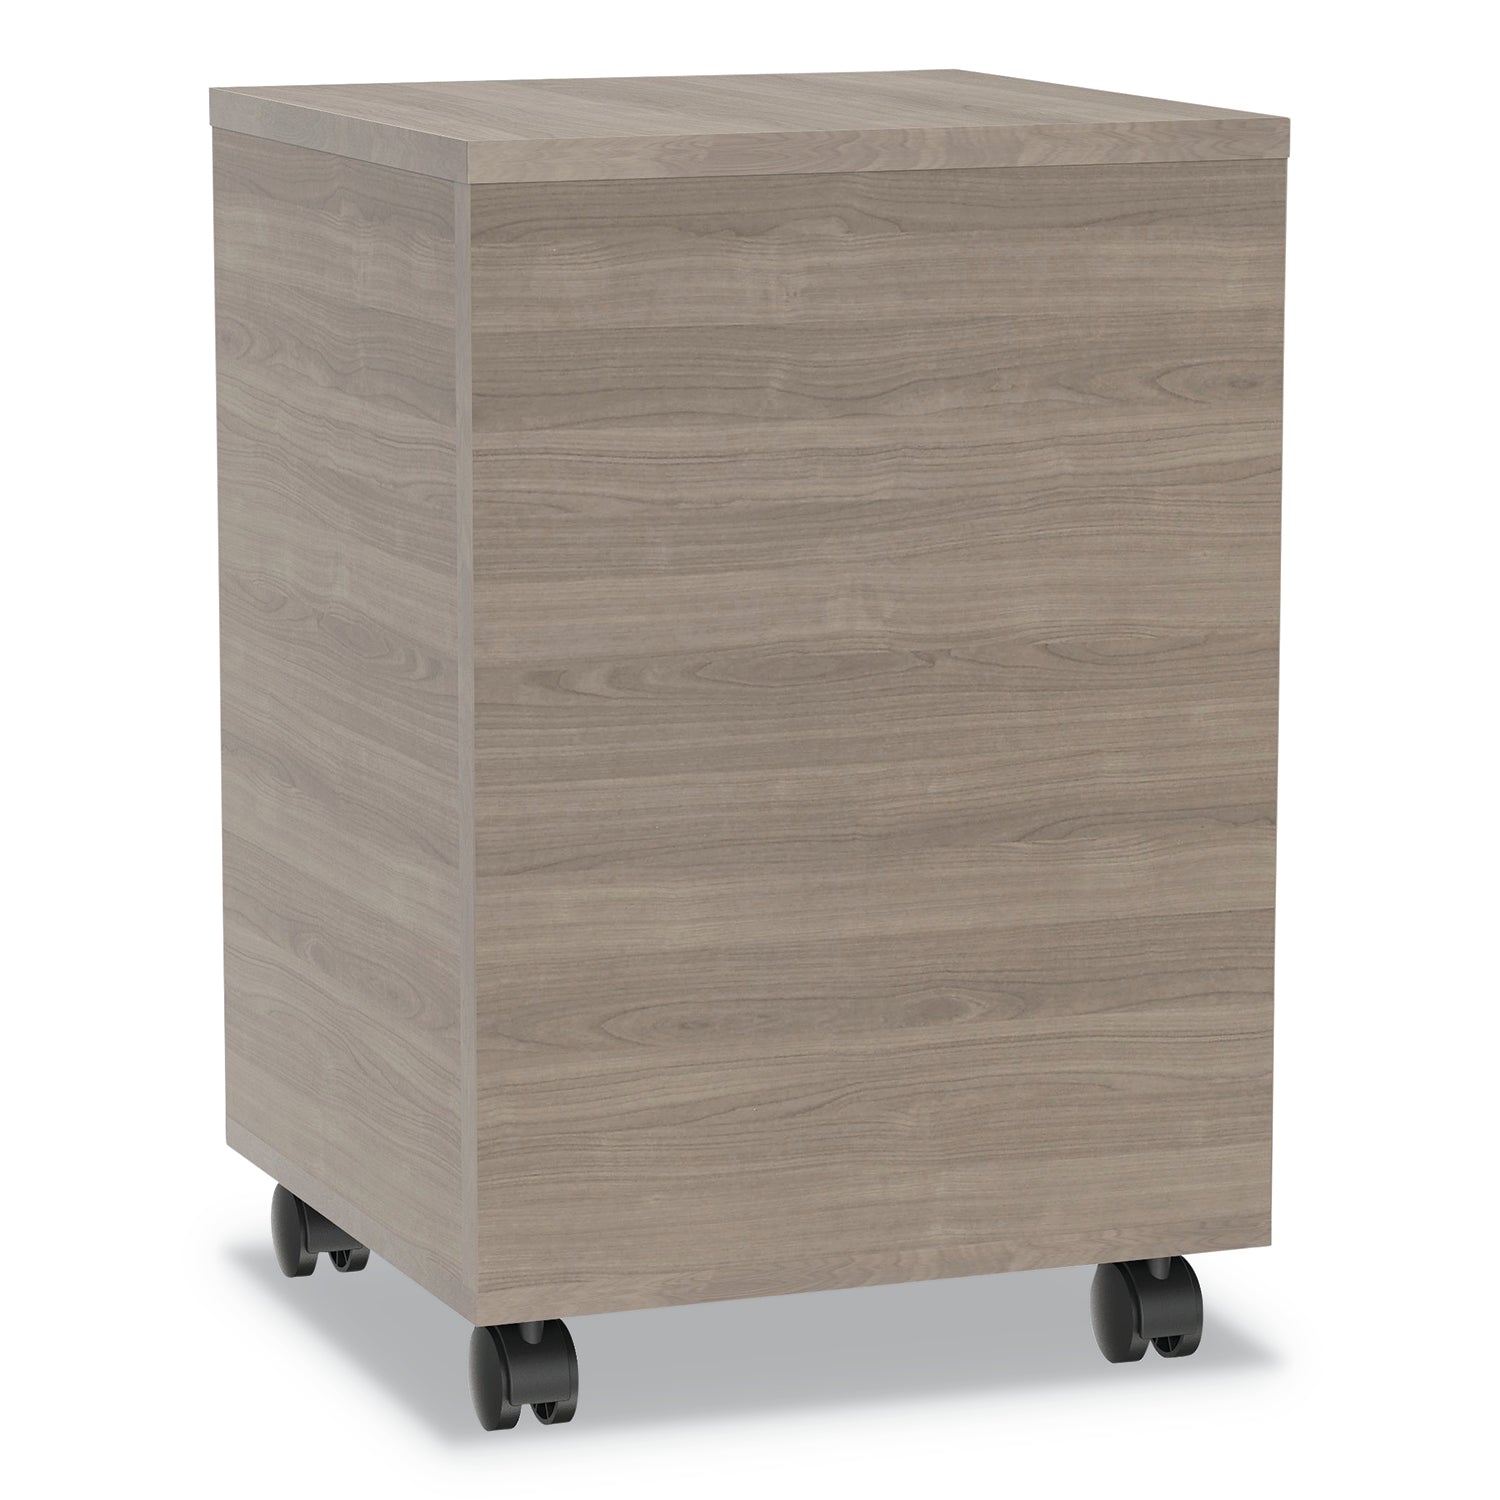 urban-mobile-file-pedestal-left-or-right-2-drawers-box-file-legal-a4-natural-walnut-16-x-1525-x-2375_litur610nw - 4